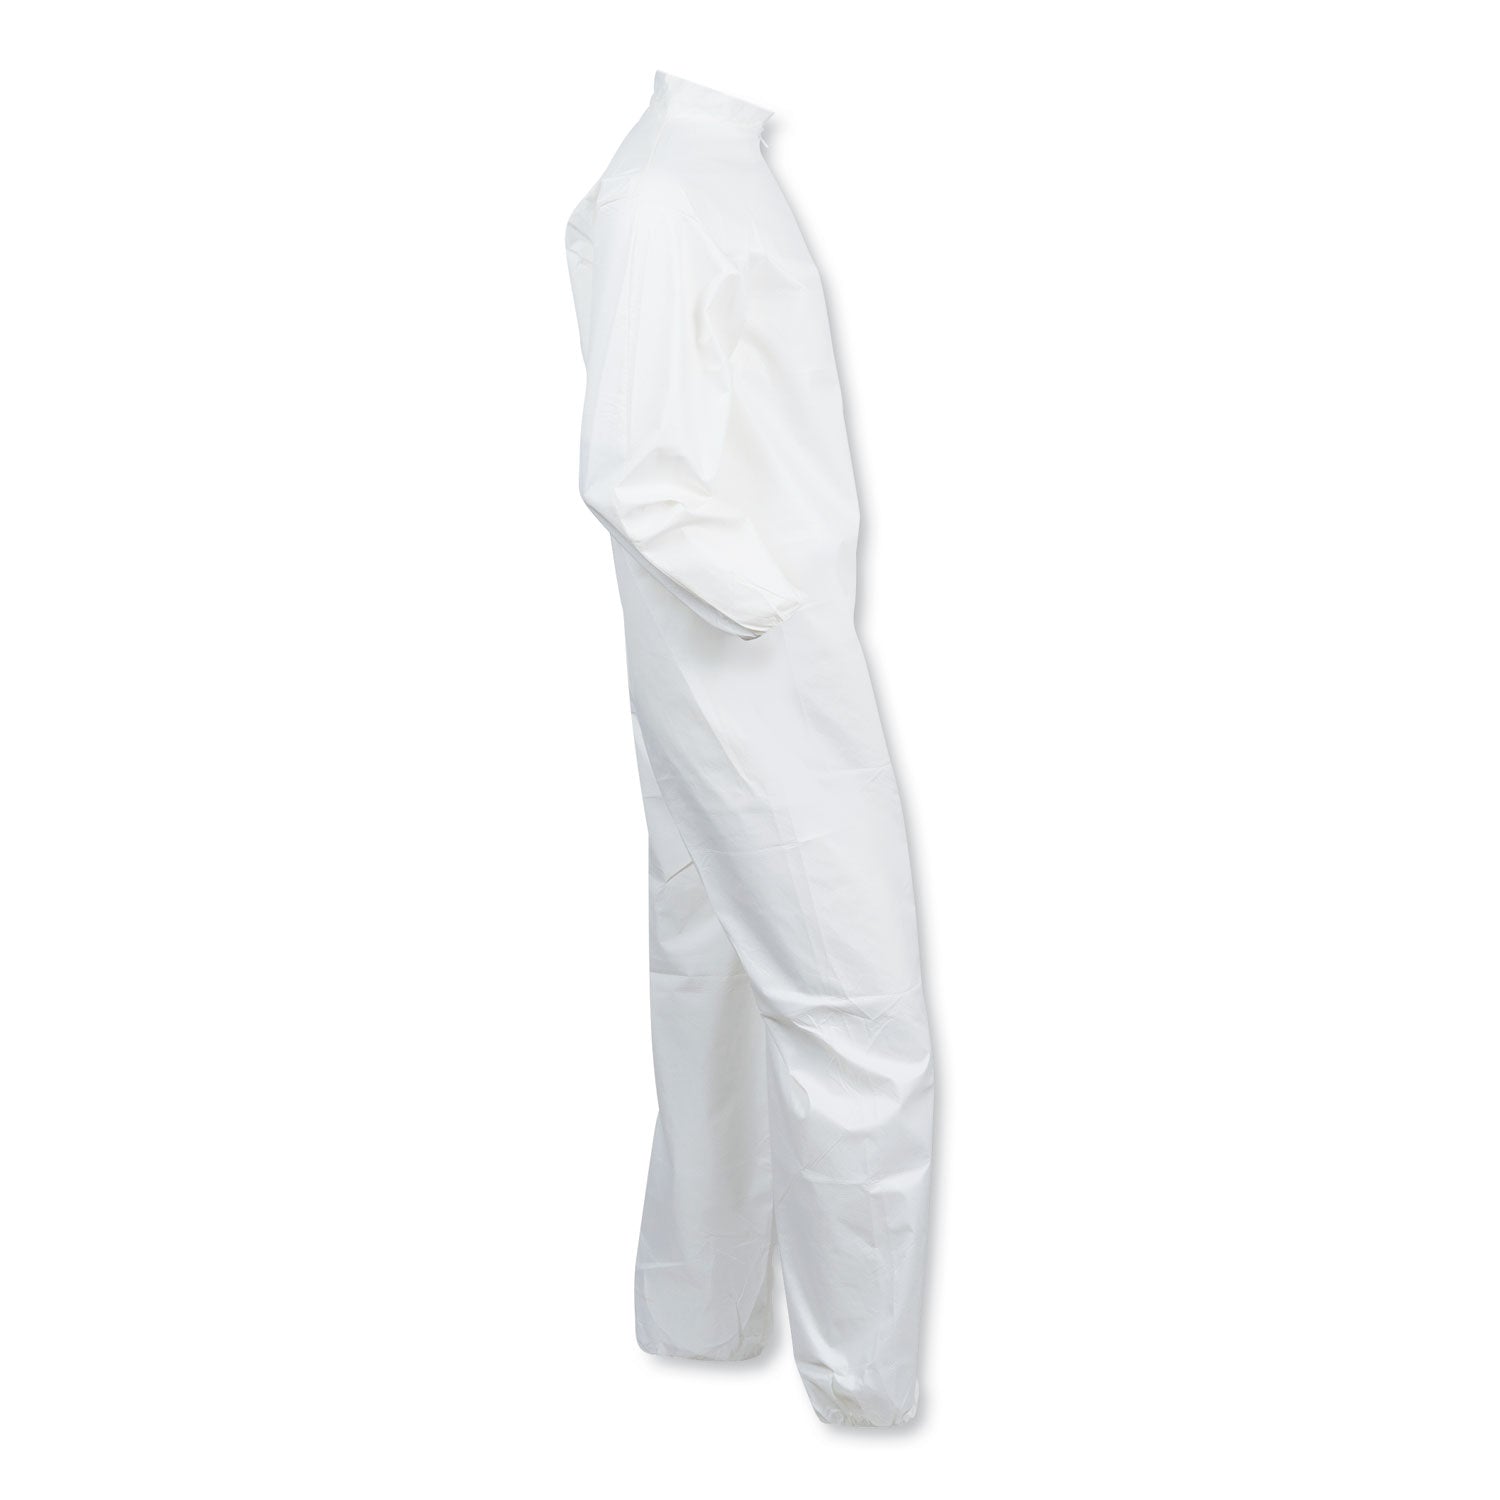 a40-coveralls-elastic-wrists-ankles-x-large-white_kcc44314 - 5